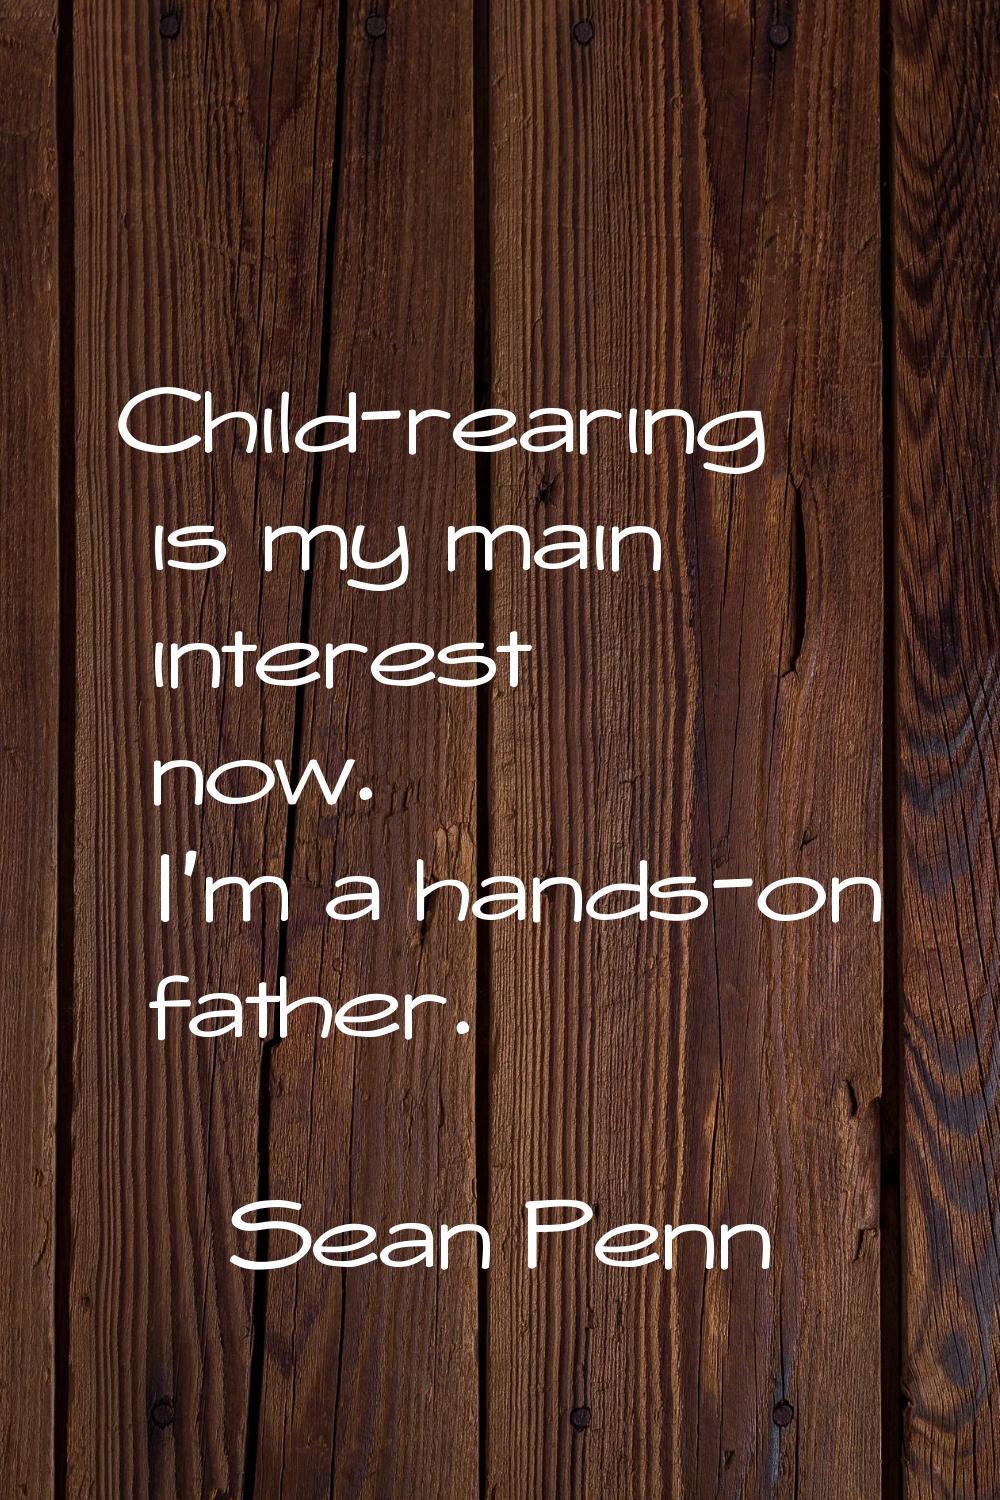 Child-rearing is my main interest now. I'm a hands-on father.